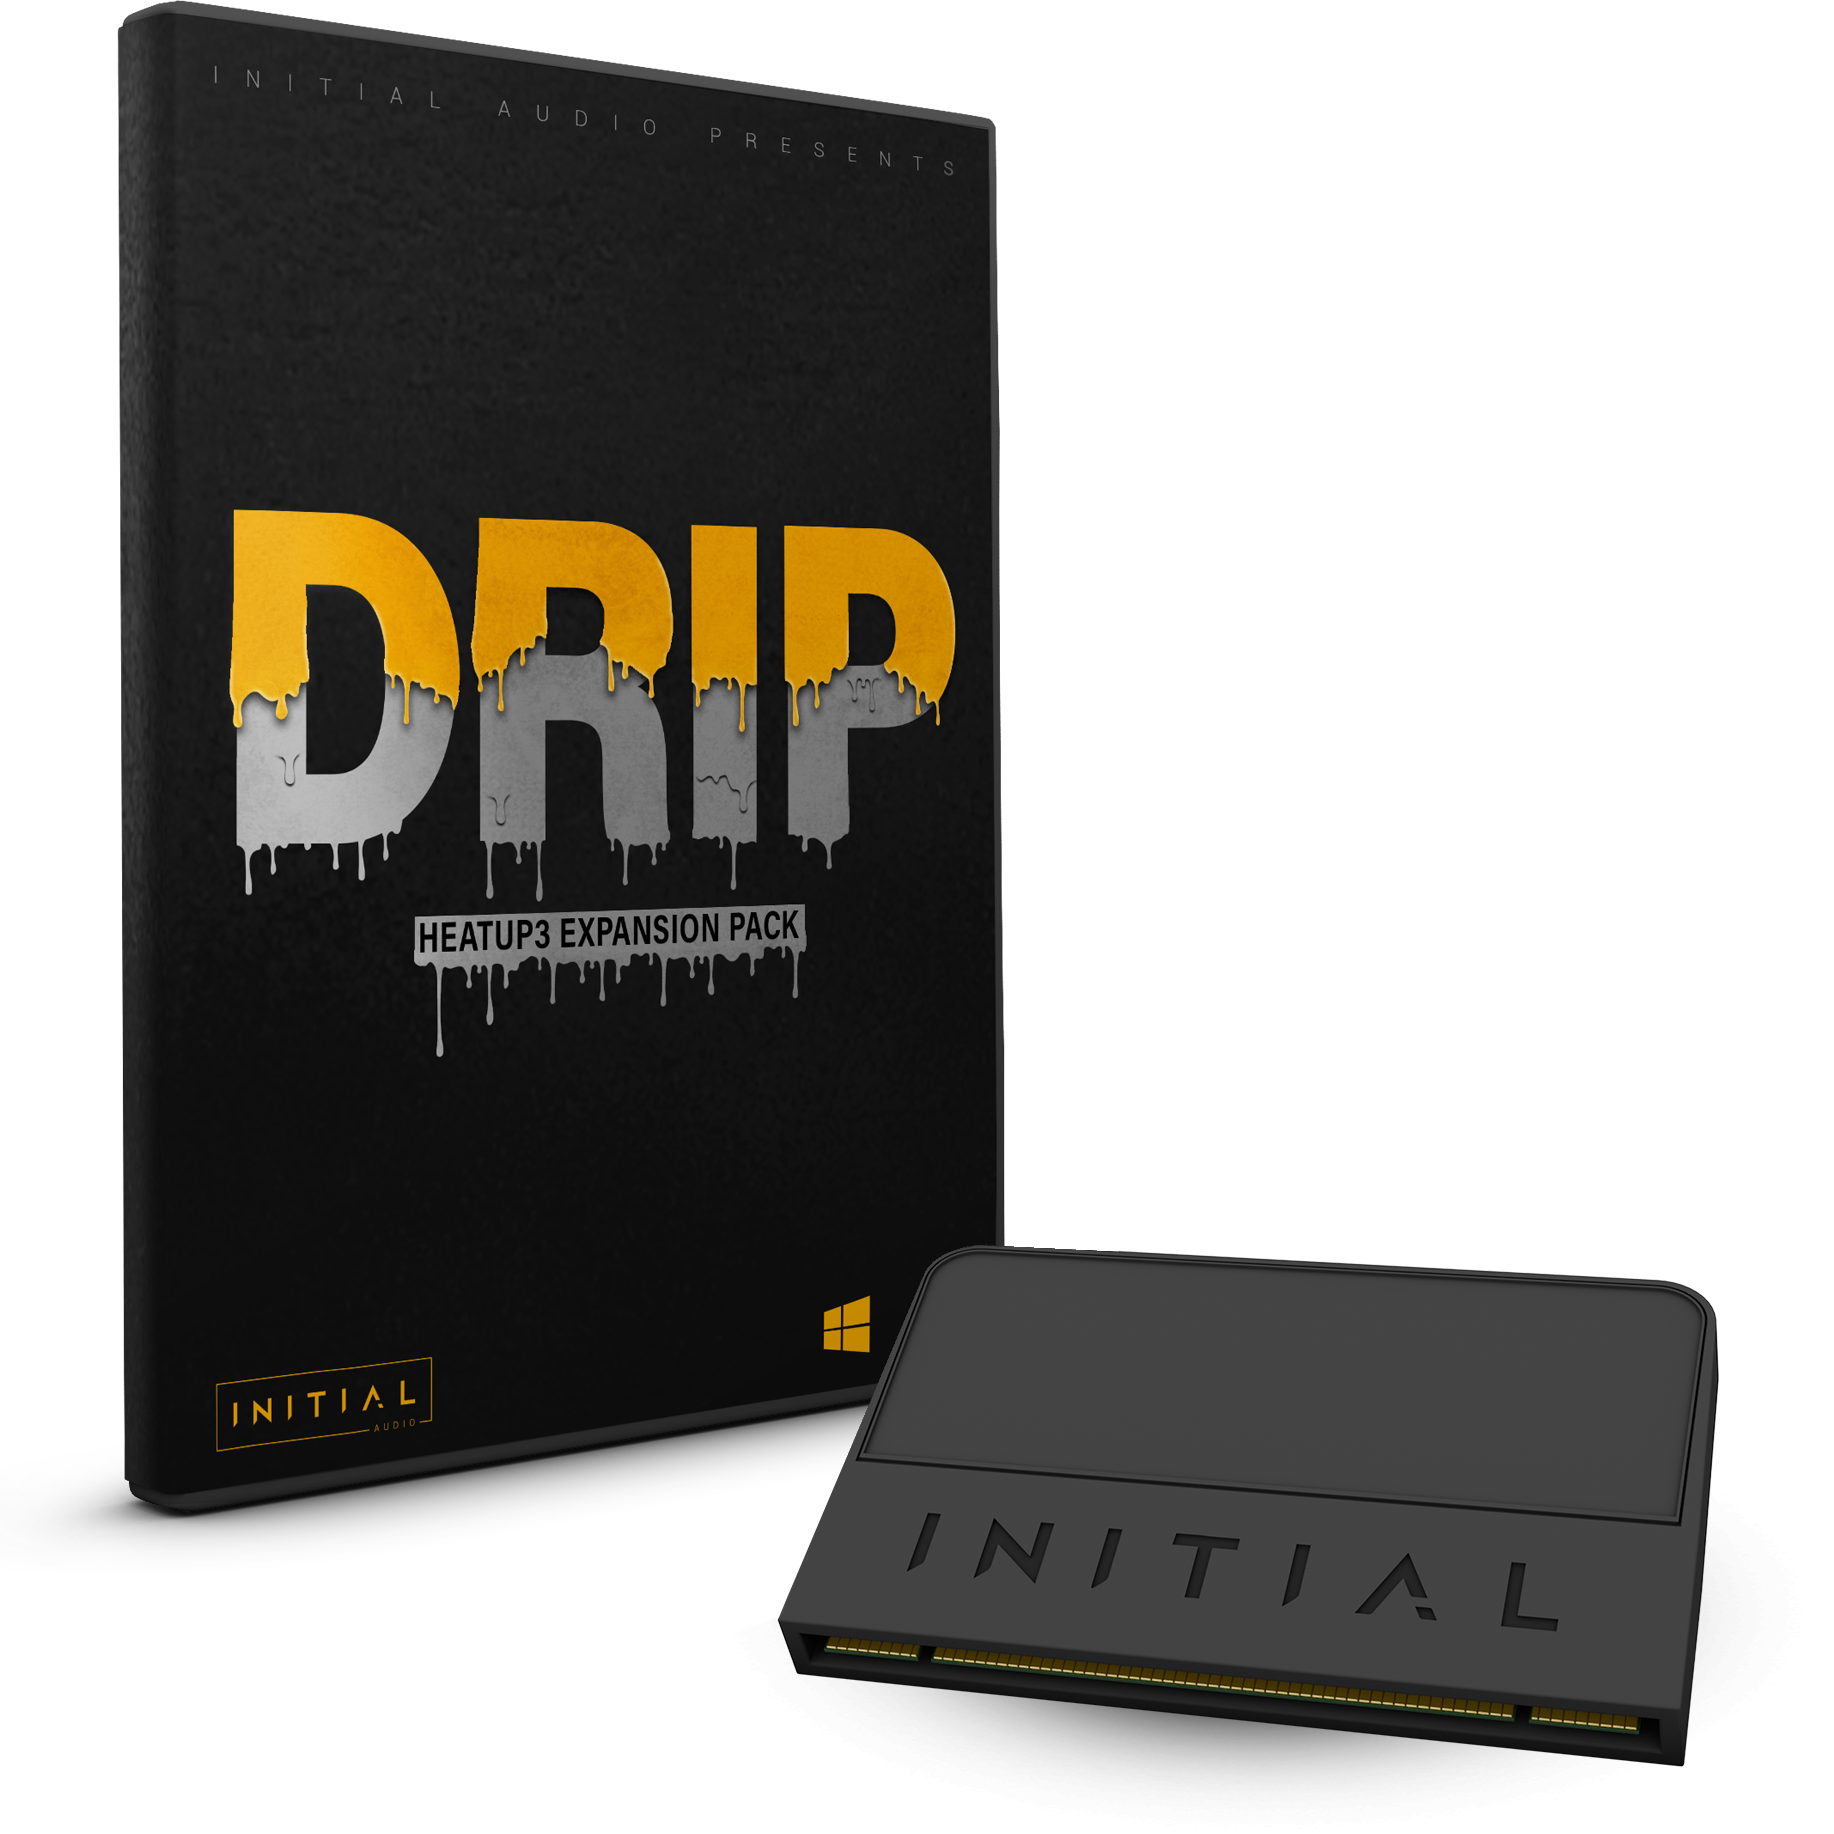 Drip Heatup3 Expansion Initial Audio